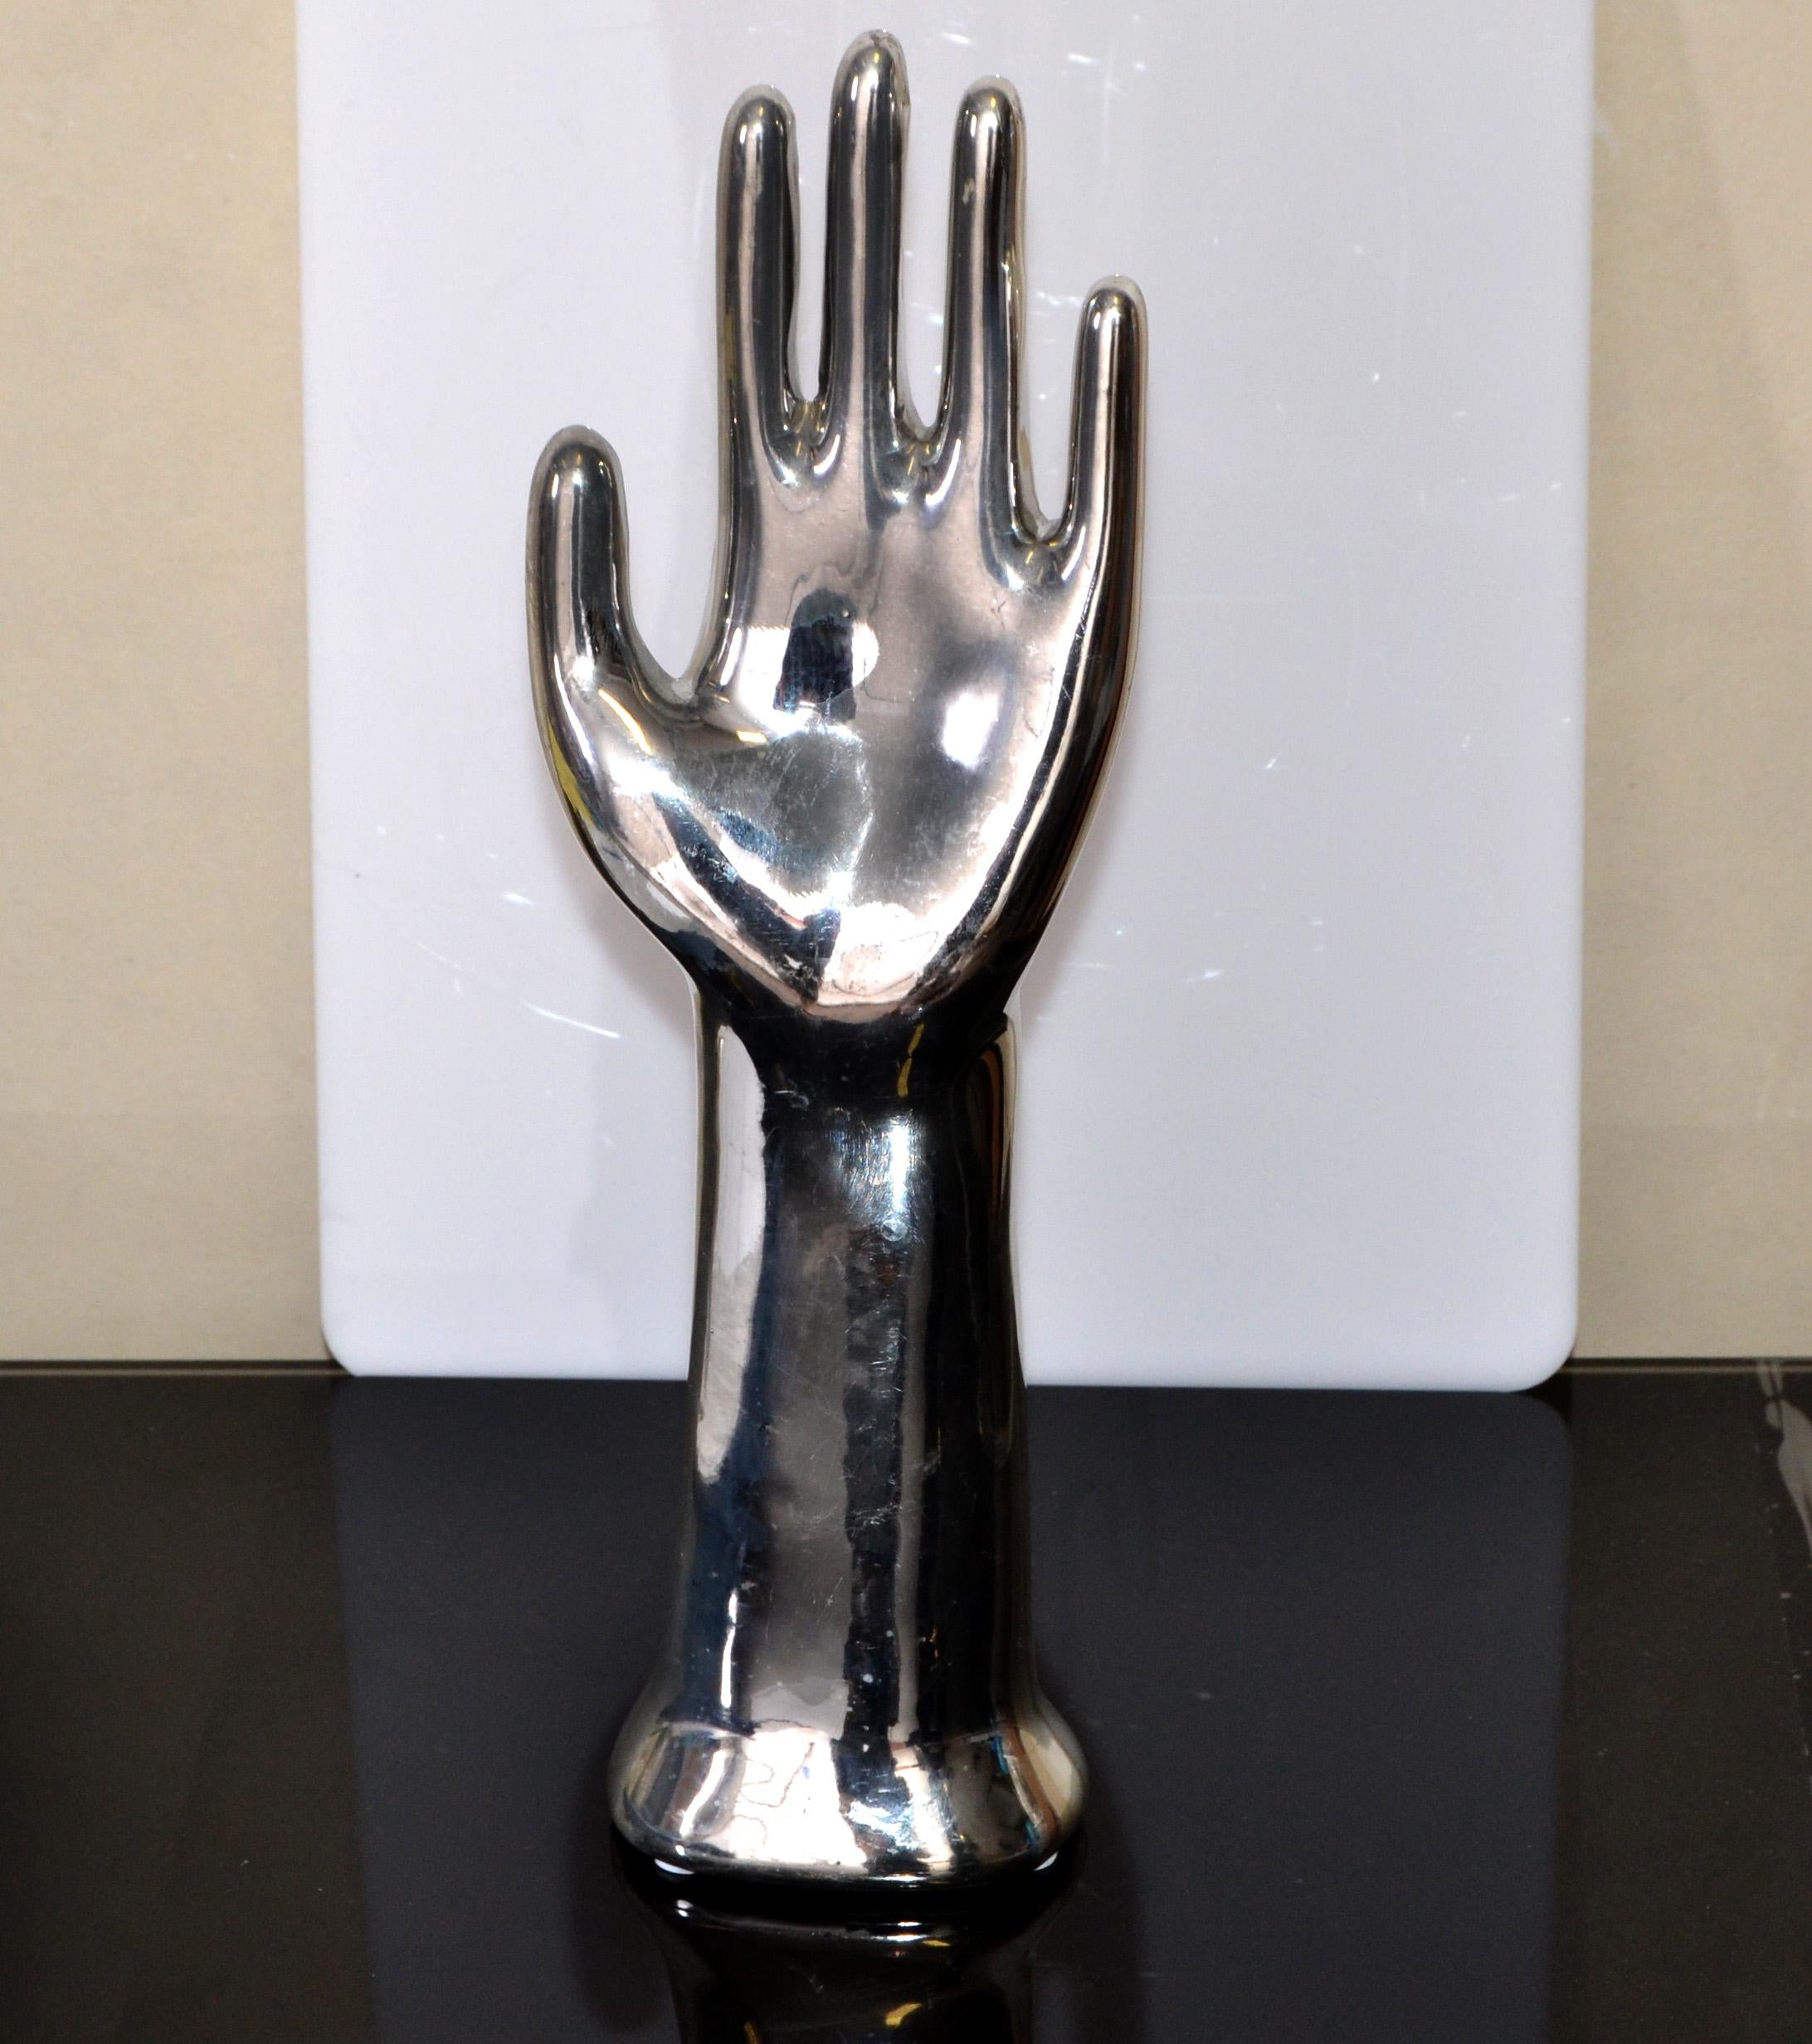 Vintage Porcelain Hand Glove Mold Nickel Plated Jewelry Stand Sculpture 1970s For Sale 3